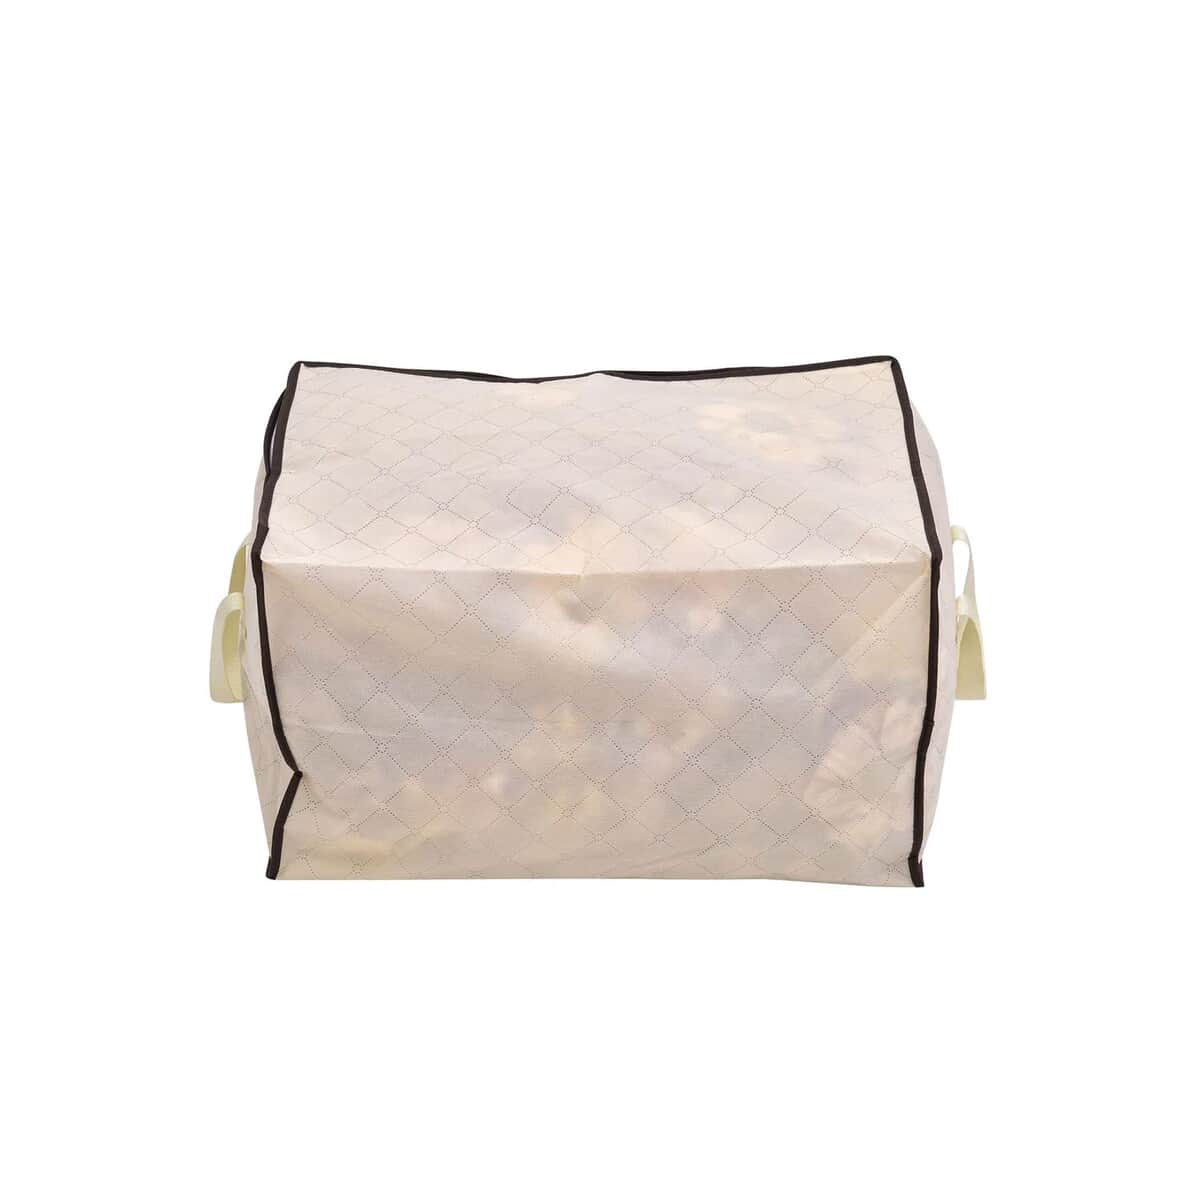 Set of 5 Beige Non Woven Fabric Storage Bag with Clear Window (23.6"x16.9"x 13.7") image number 4